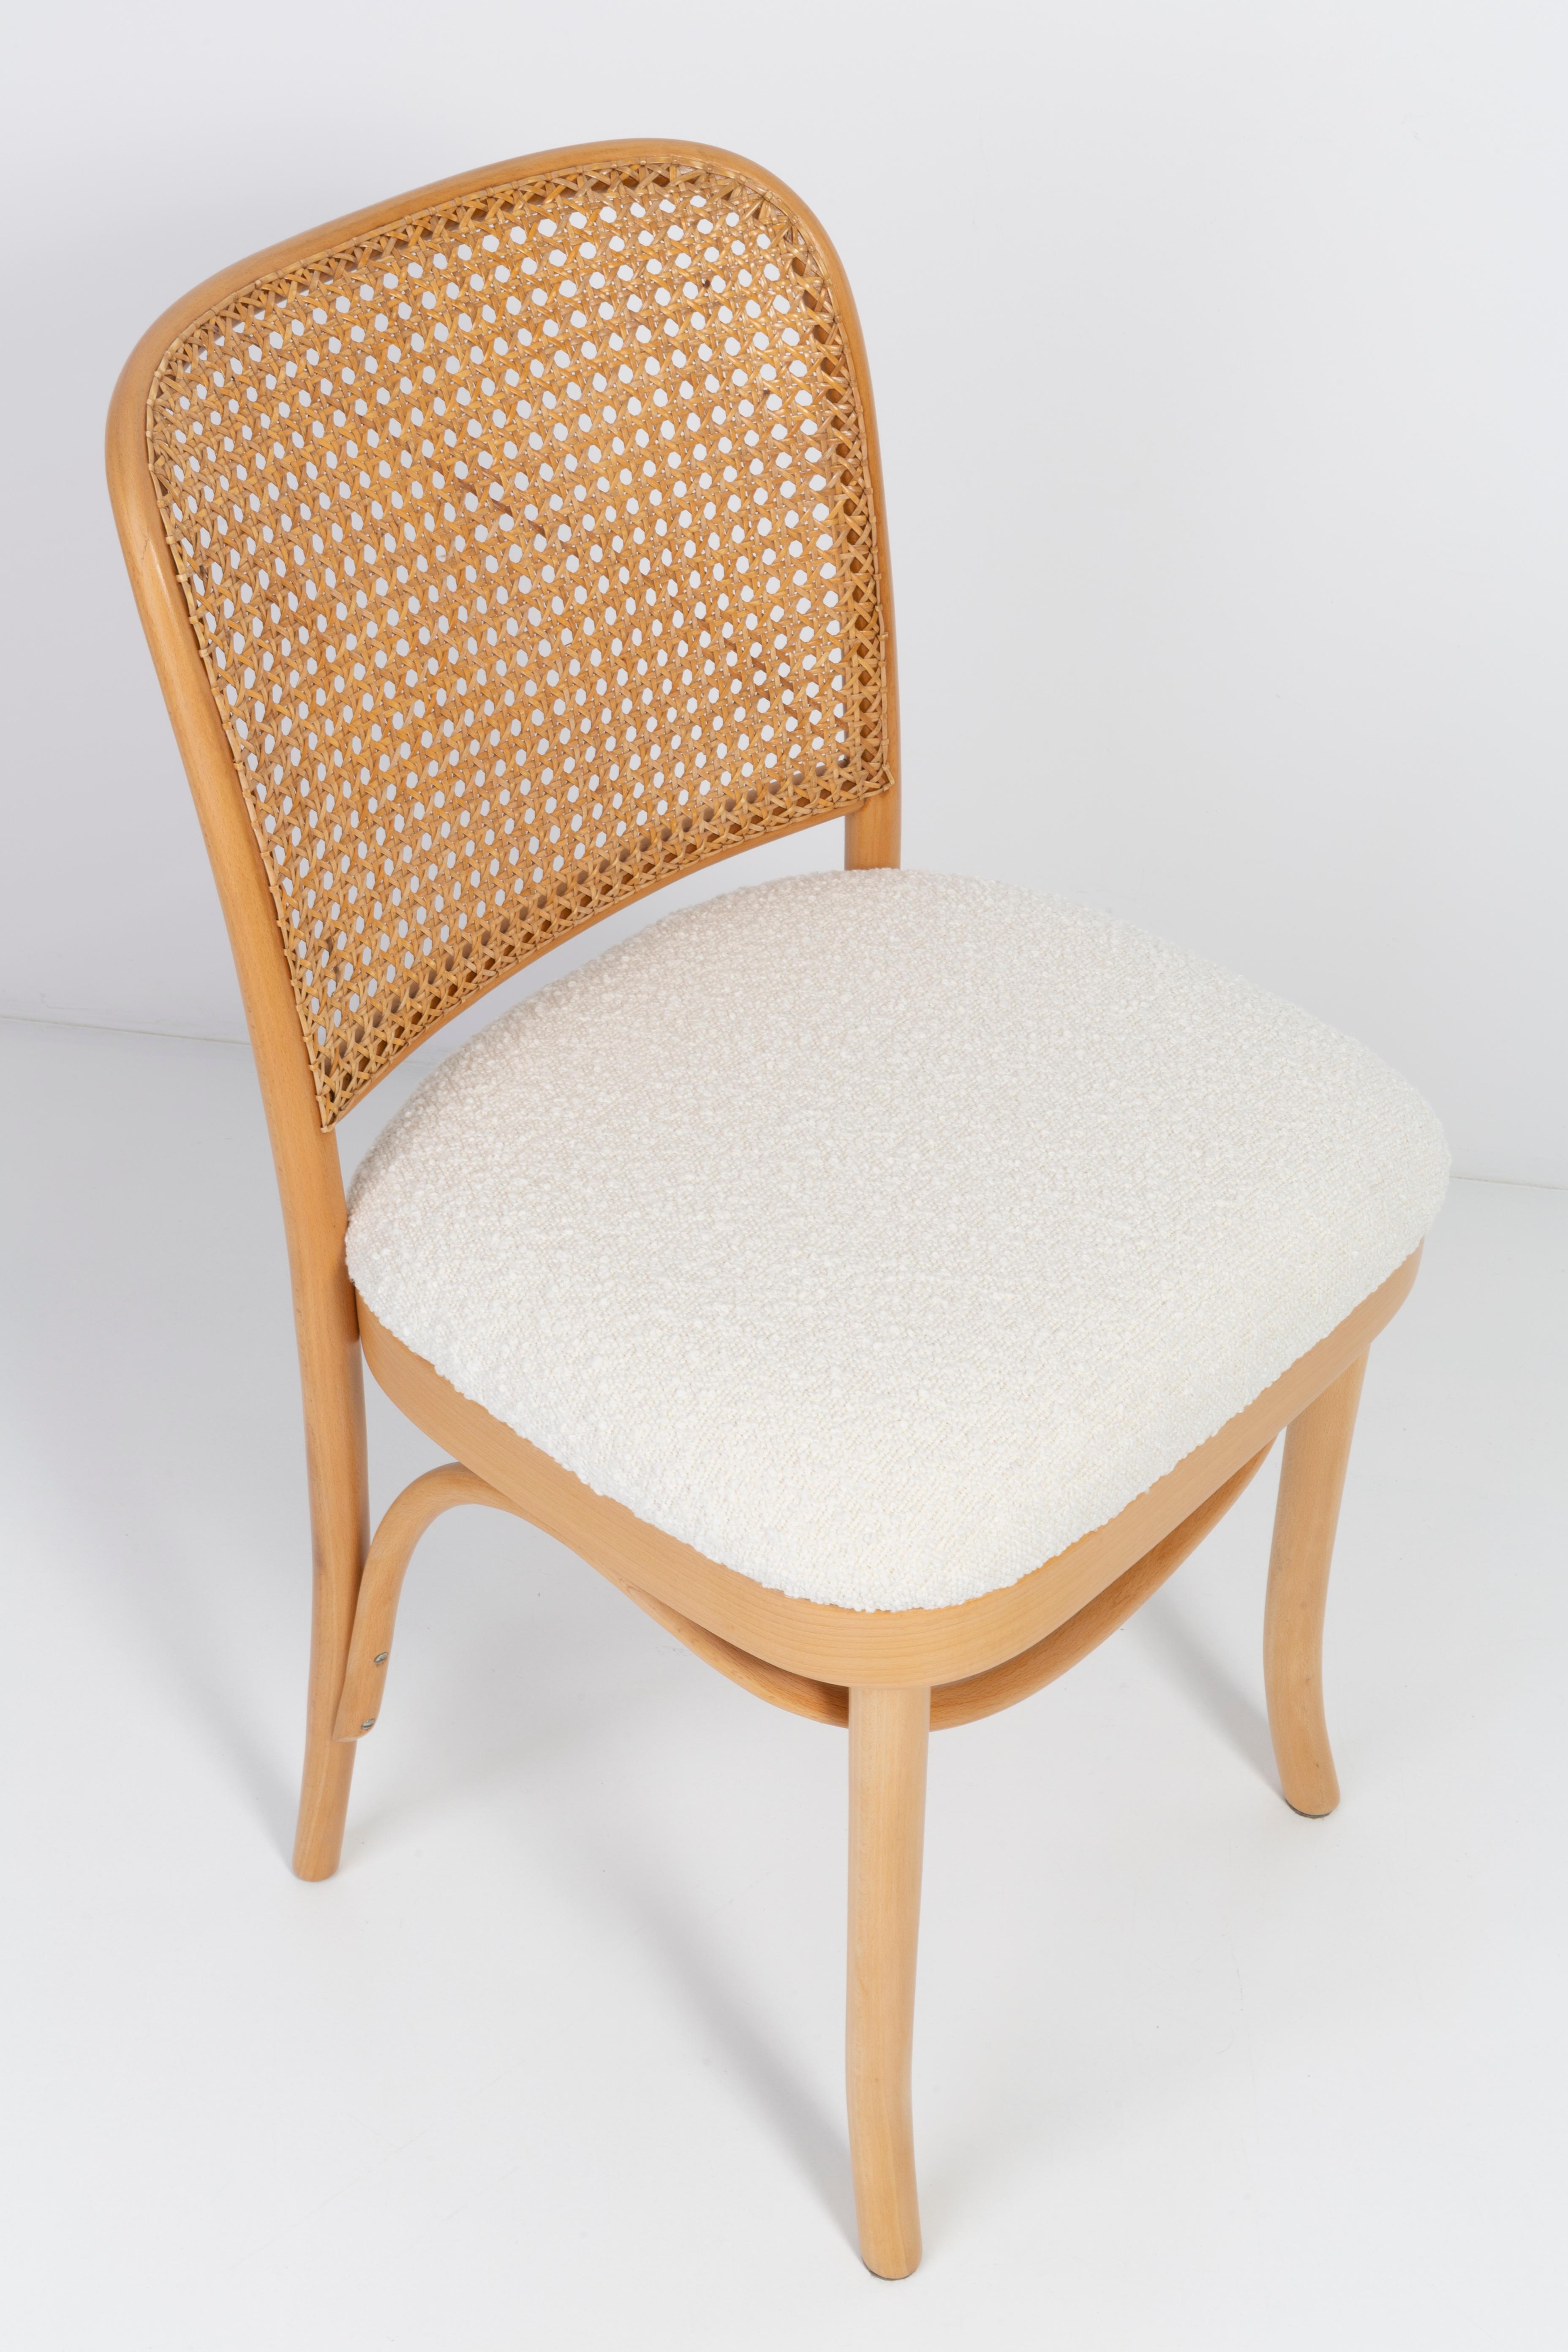 Set of Eight White Boucle Thonet Wood Rattan Chairs, 1960s For Sale 1